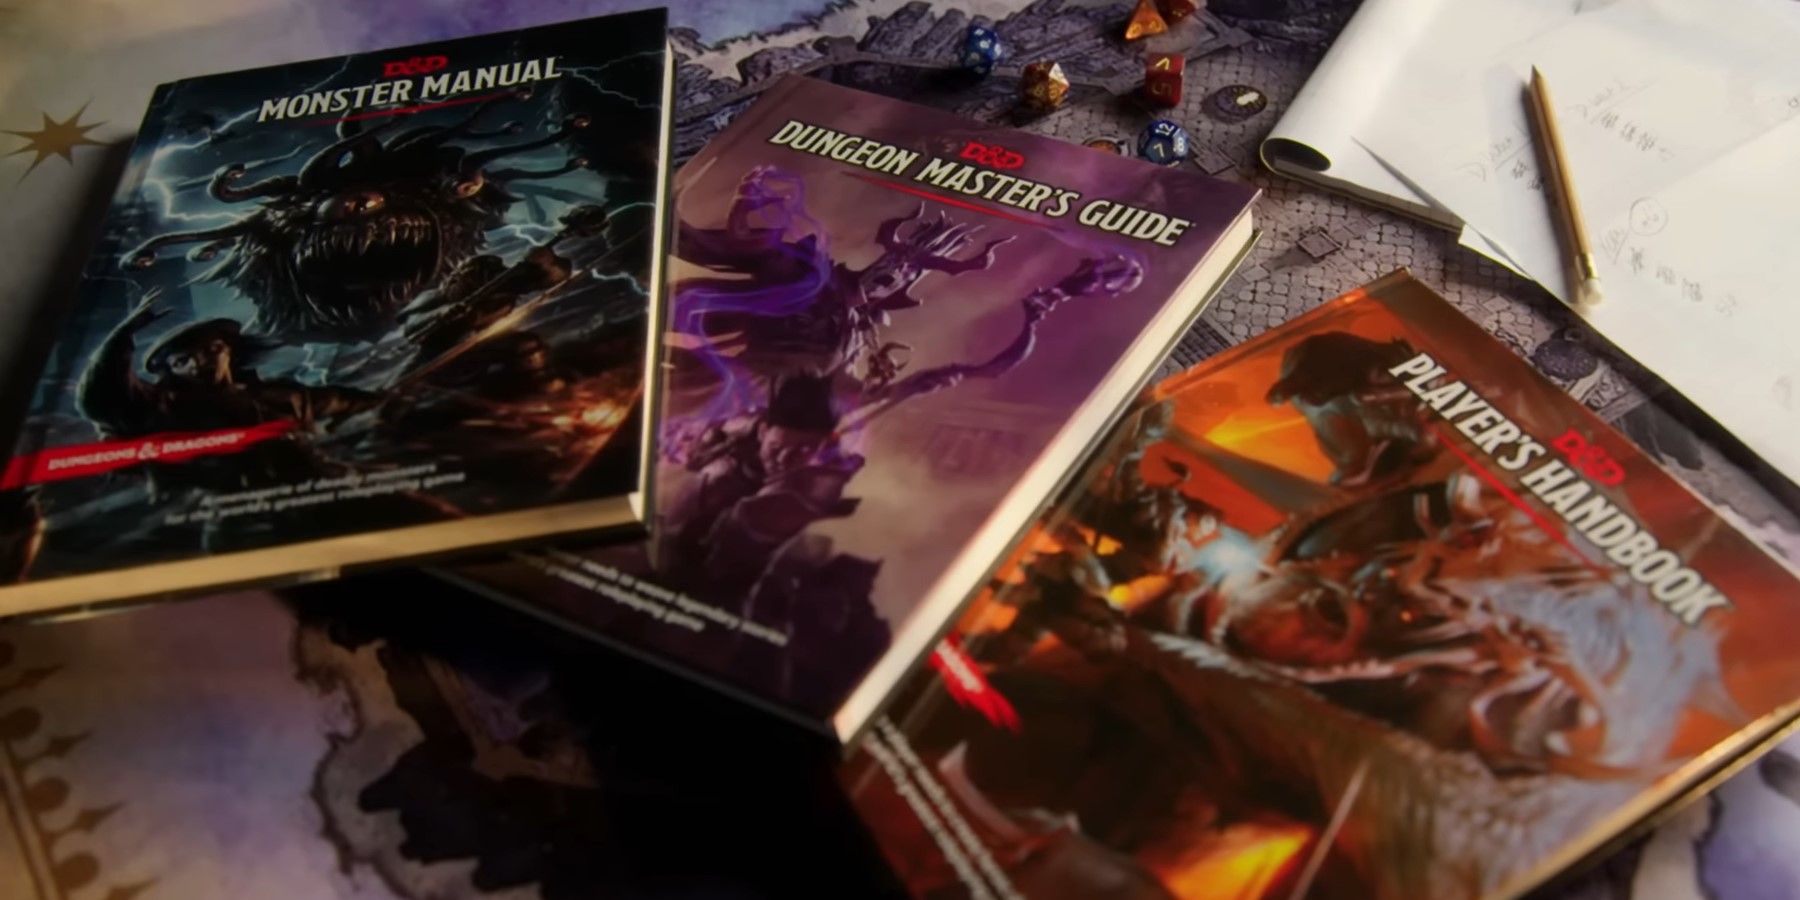 One D&D revised rule books